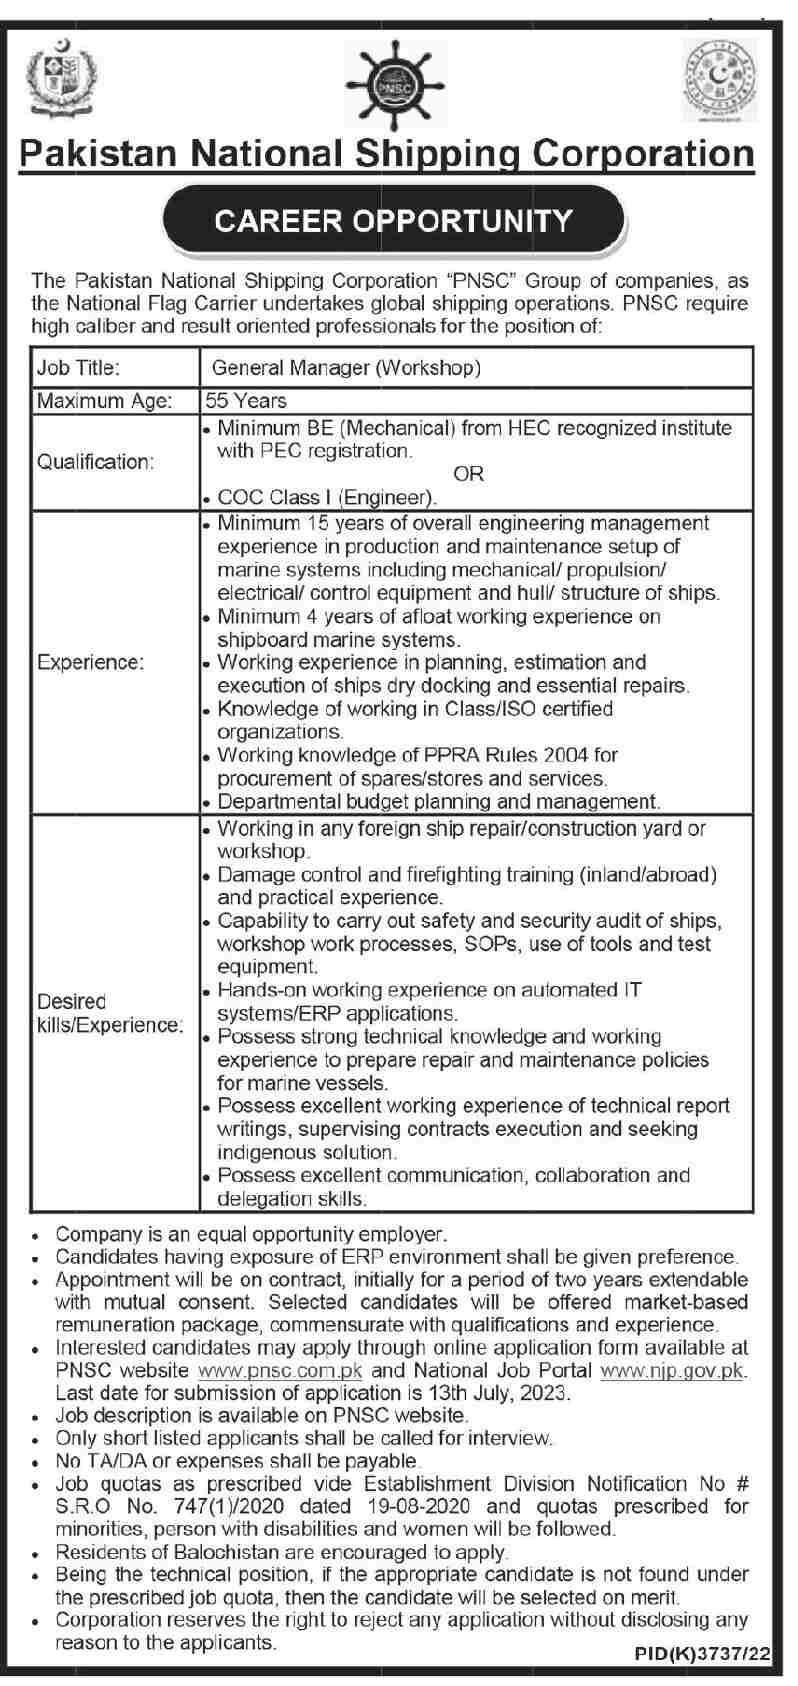 Jobs in Pakistan National Shipping Corporation PNSC